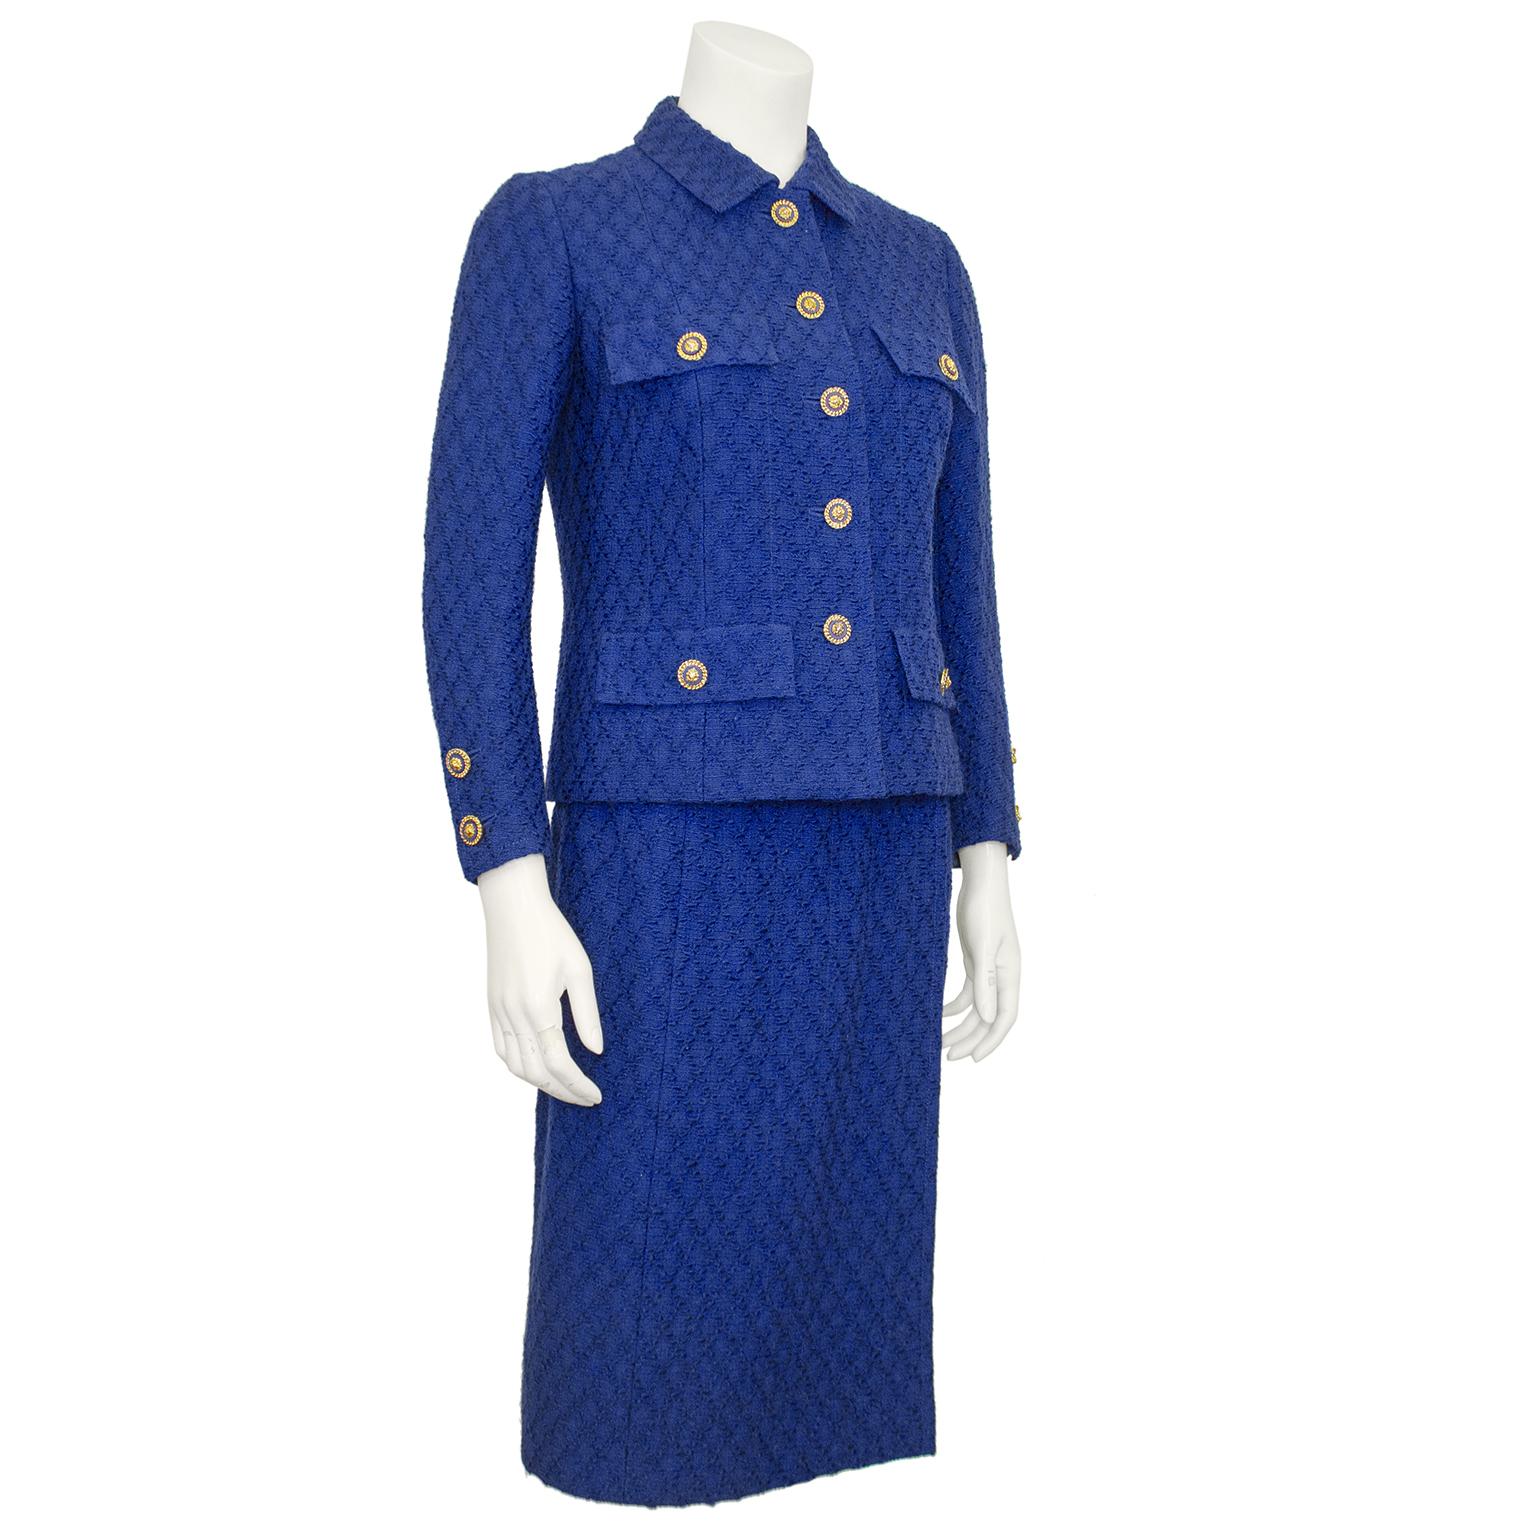 Classic 1980's Chanel Haute Couture skirt suit in royal blue bouclé diamond pattern wool. Jacket is fully lined and finished at the hem with the iconic gold chain. Five royal blue and gold metal lions head buttons up the front with 2 more on each